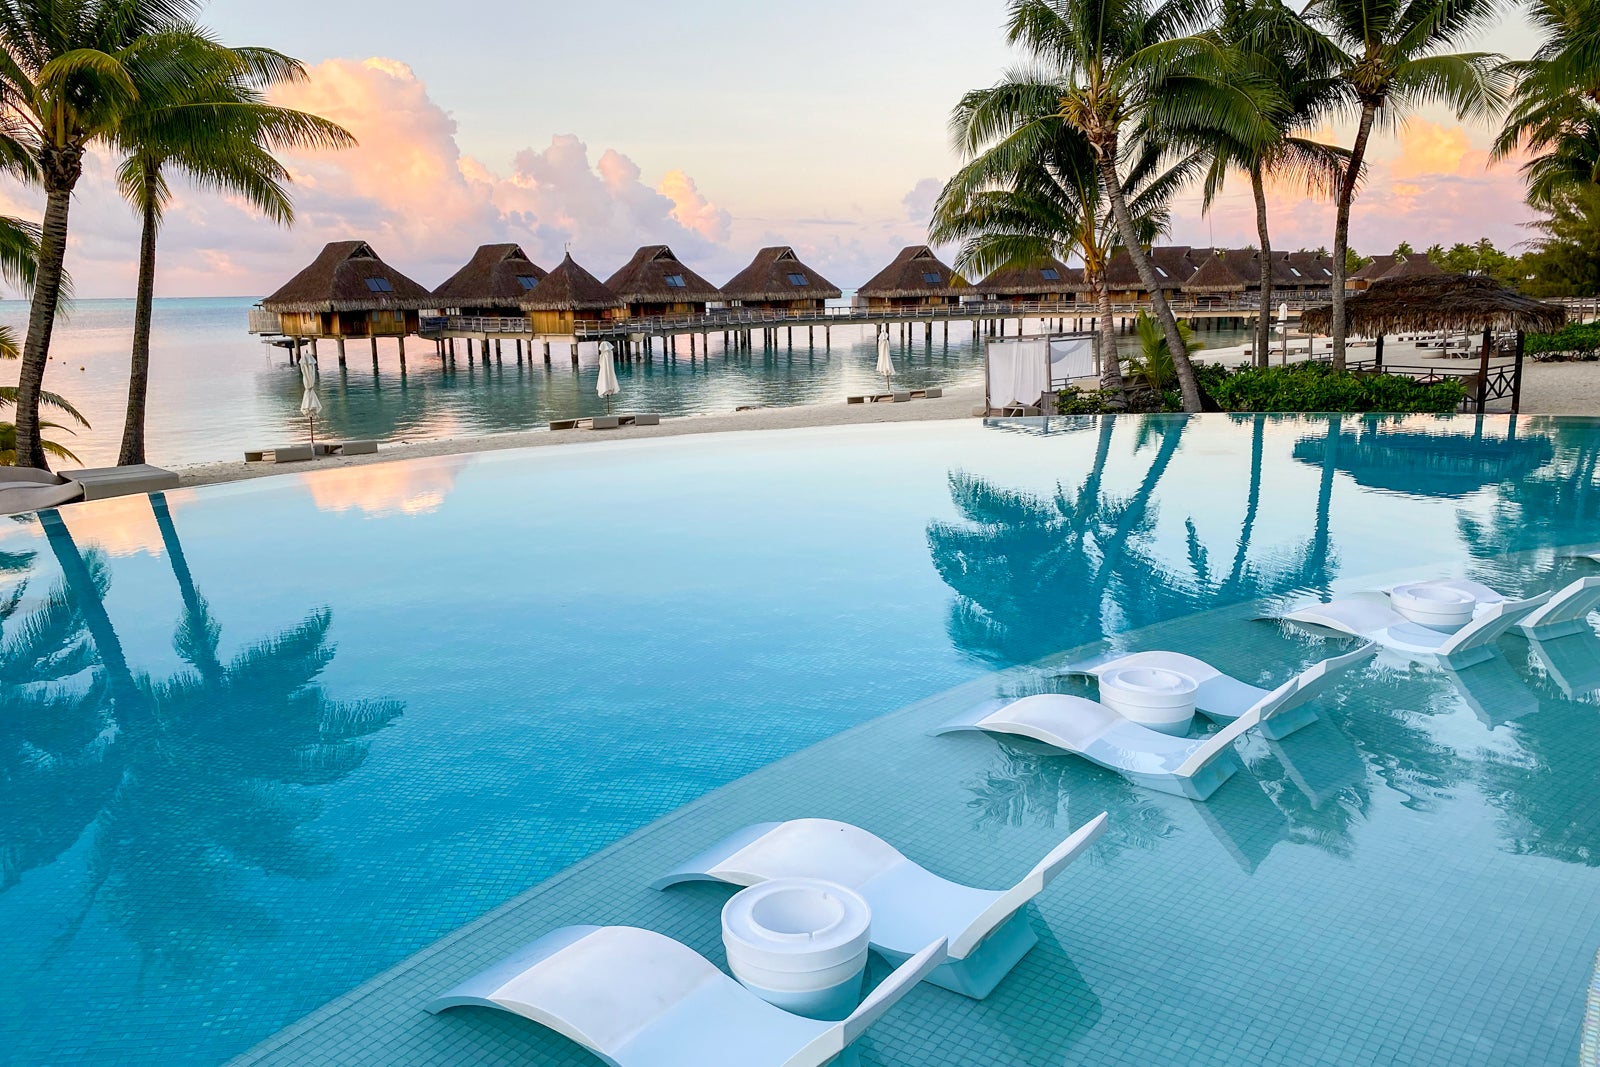 an infinity pool in the foreground with overwater bungalows in the background, all at a luxury resort